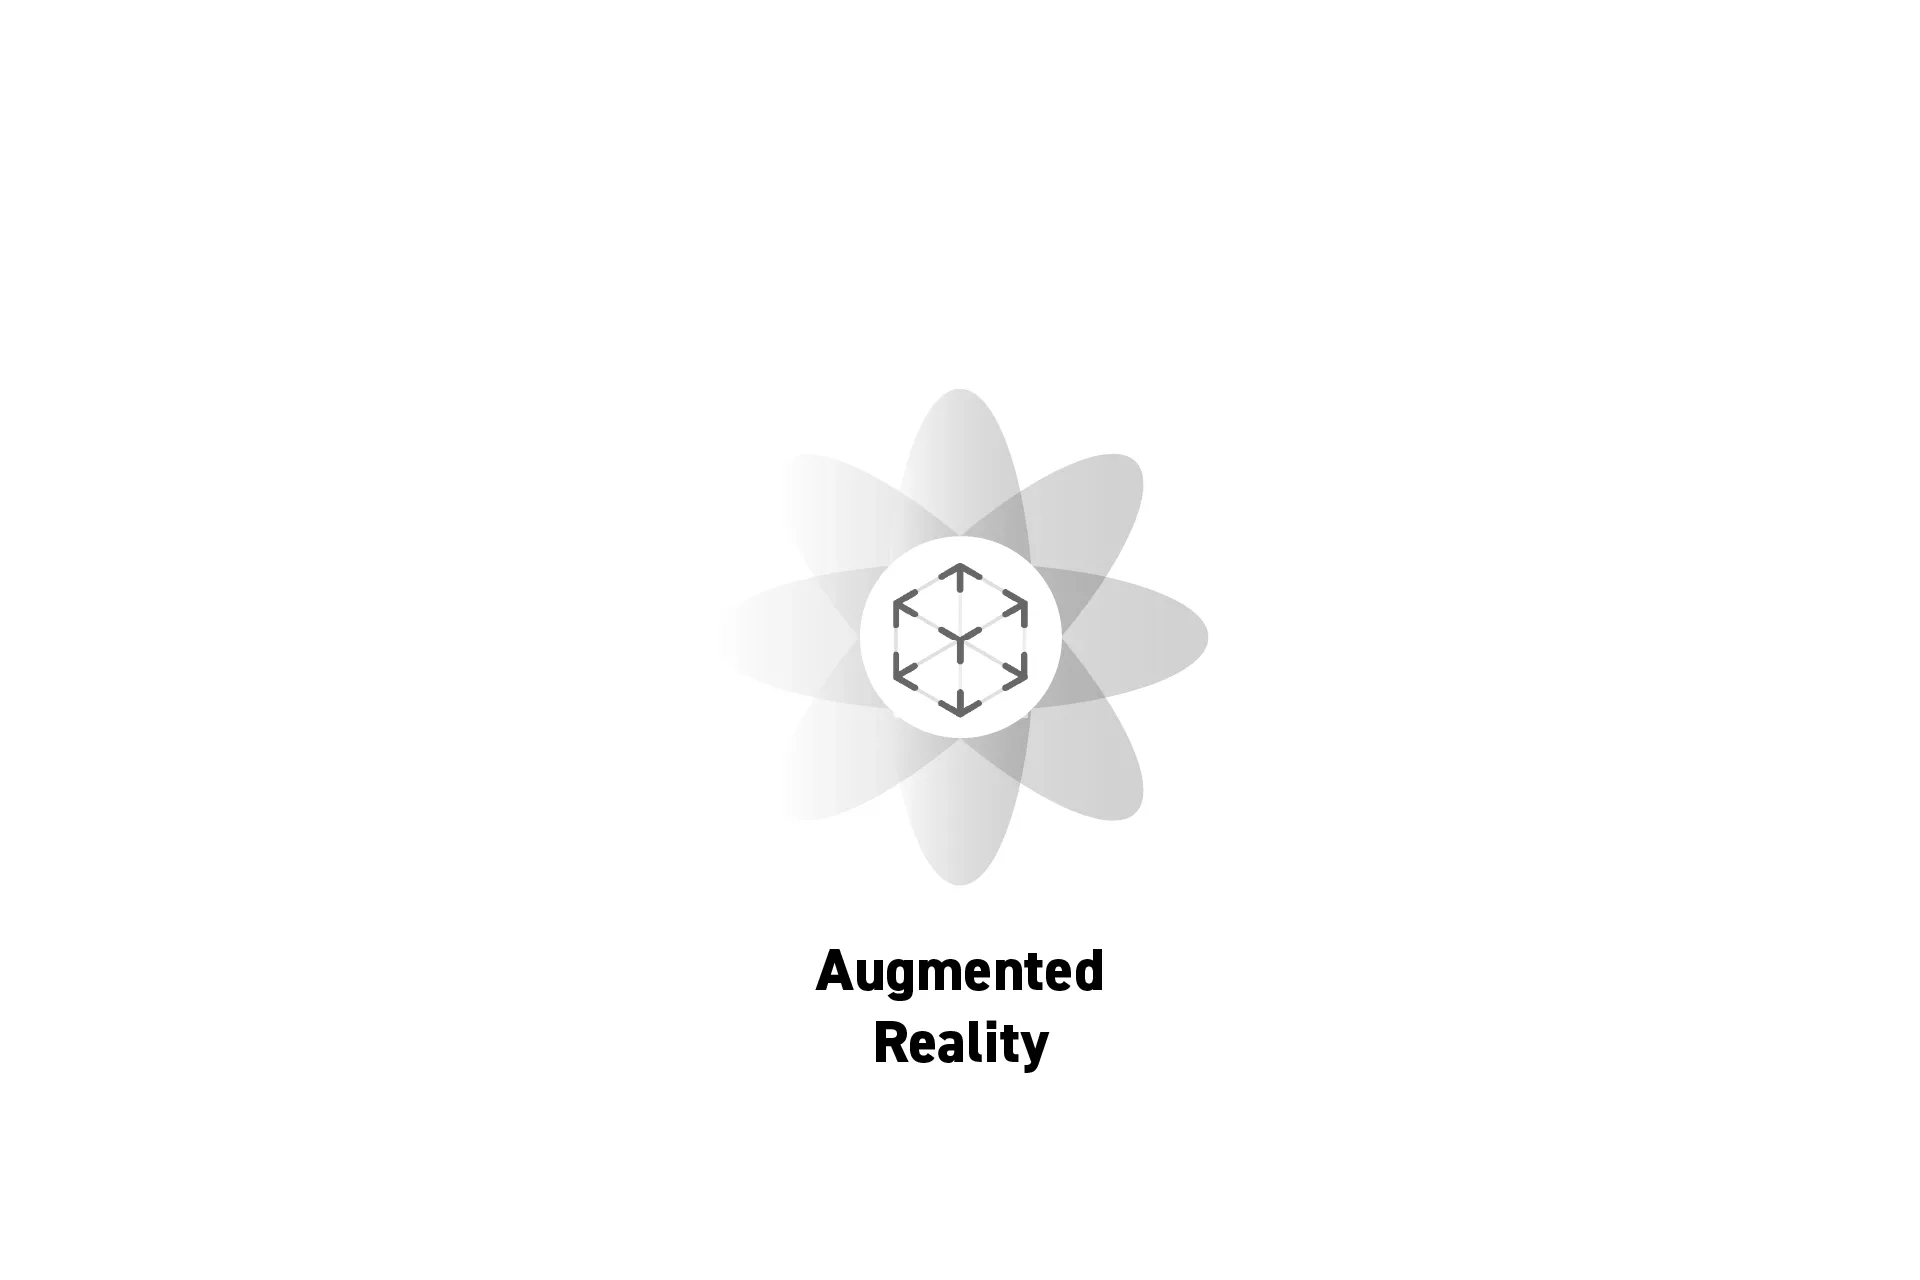 A flower that represents spatial computing with the text "Augmented Reality" beneath it.